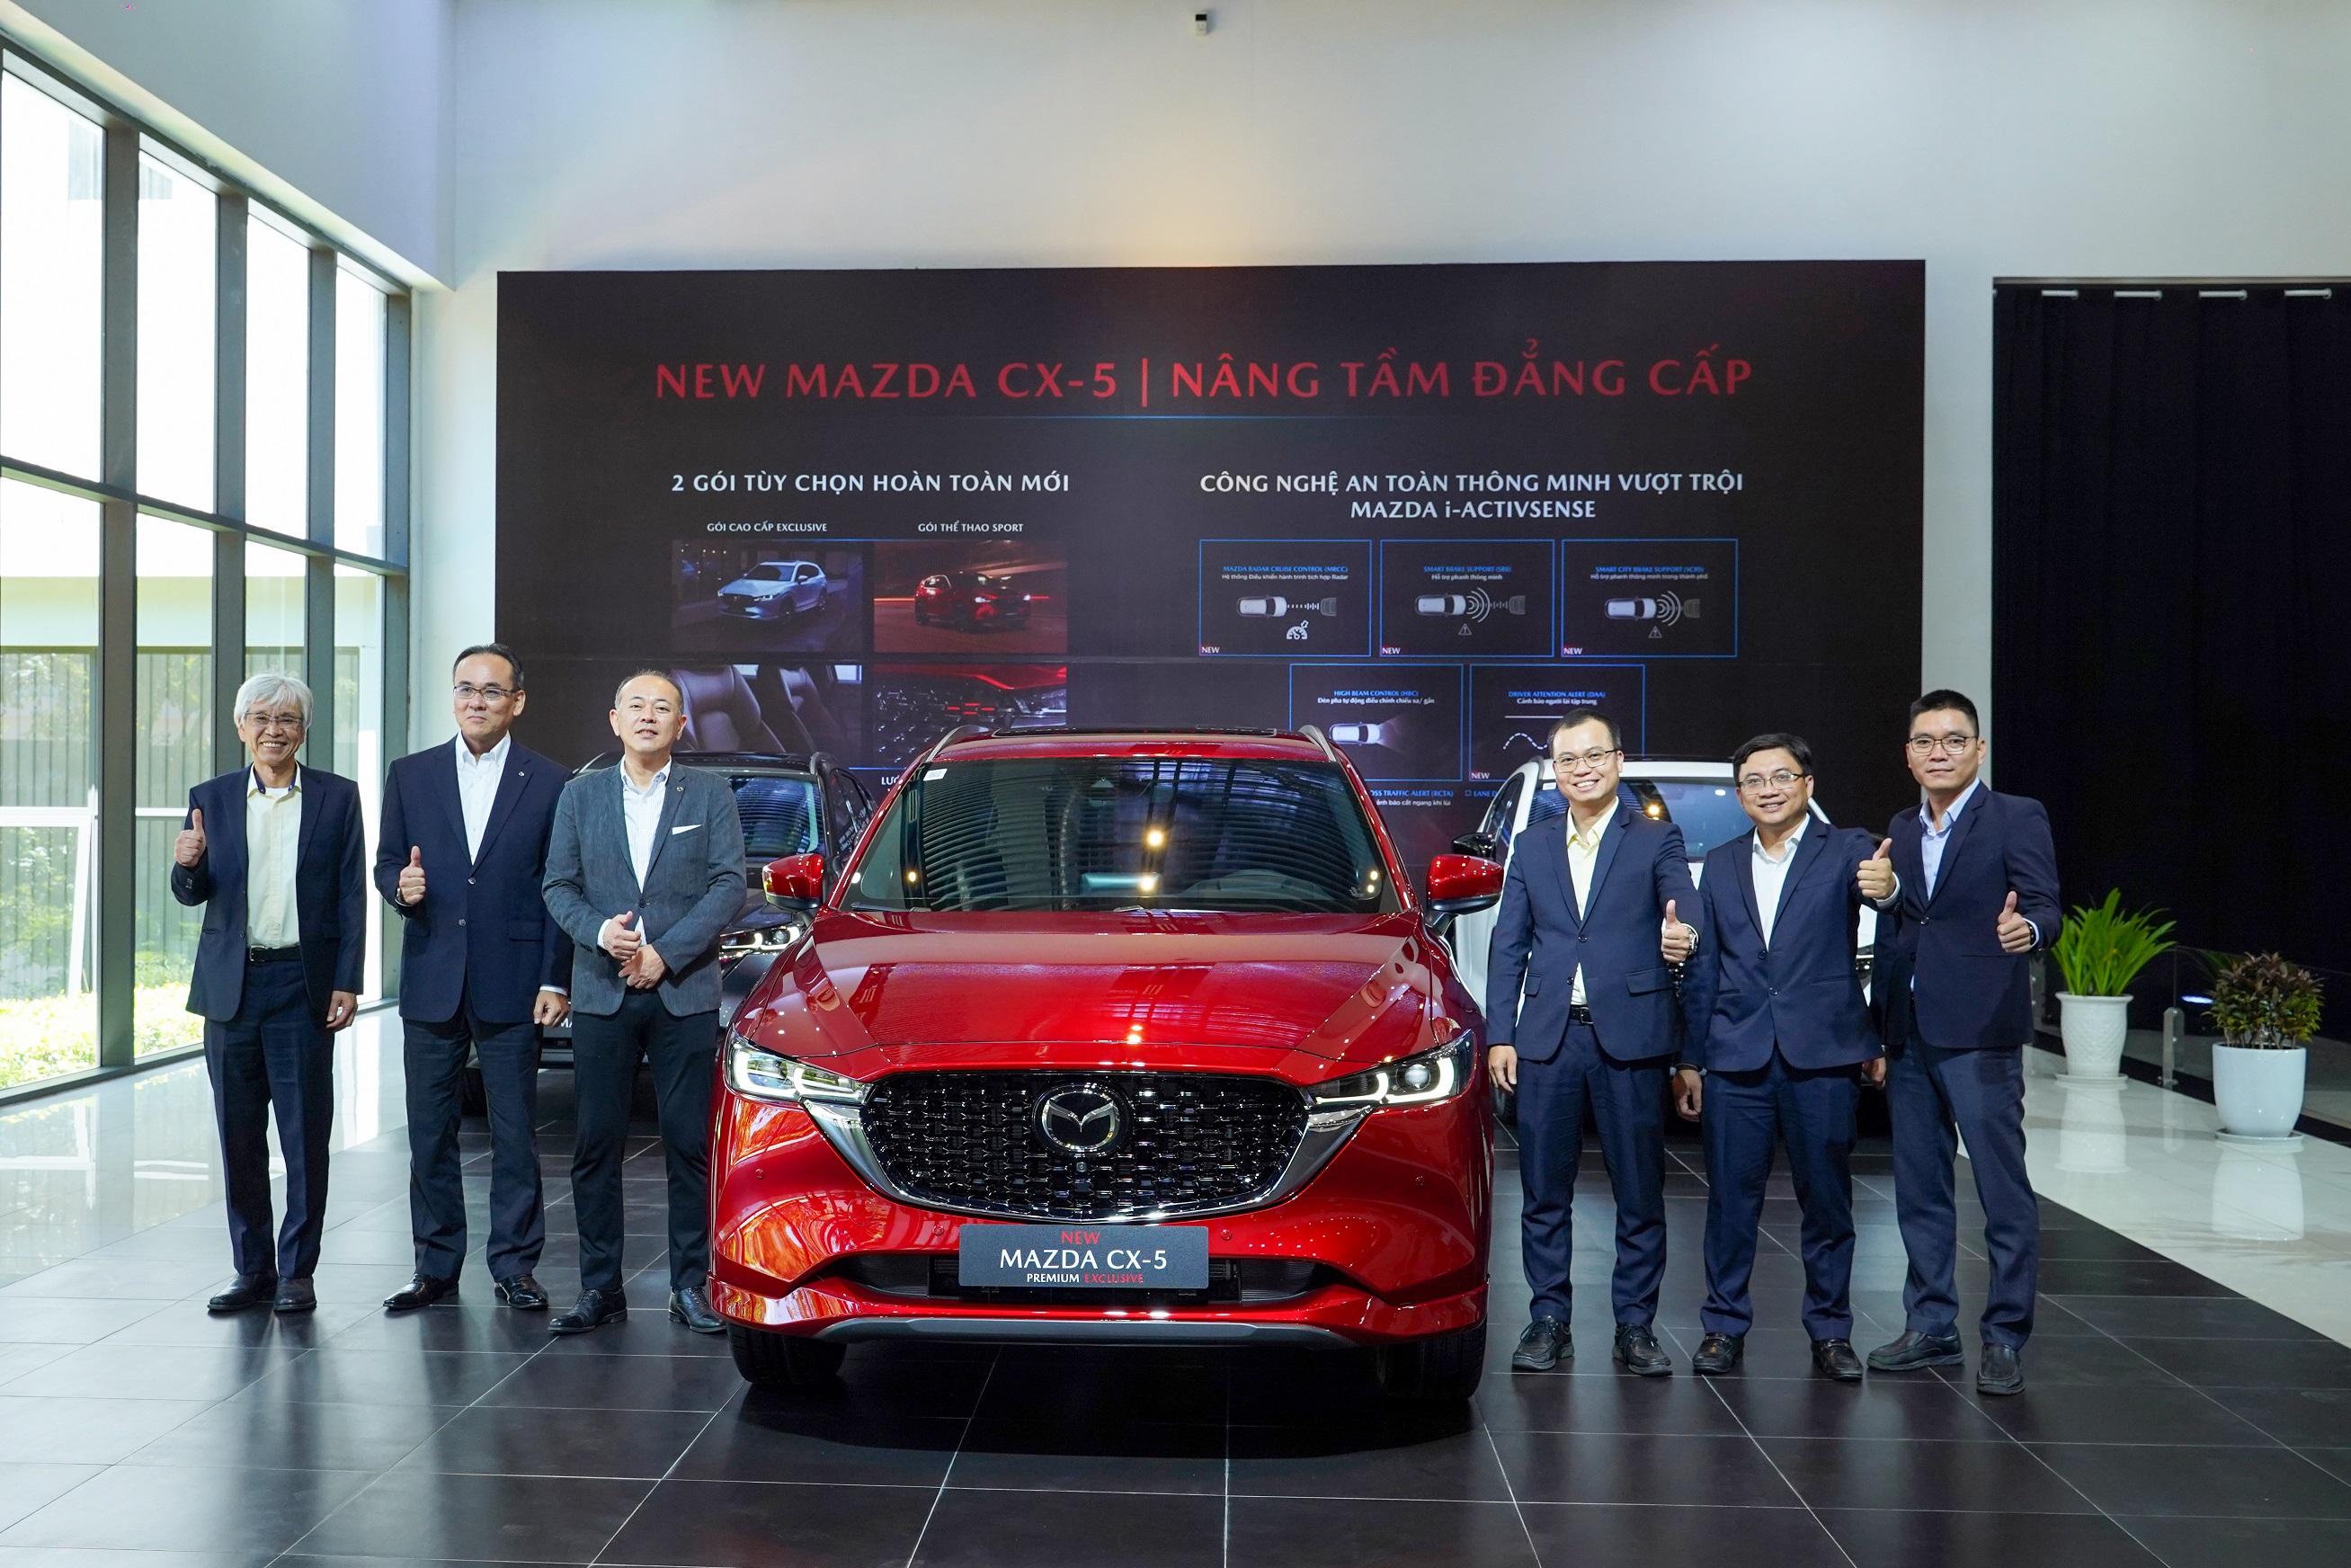  THACO AUTO launches New Mazda CX-5 on to new heights